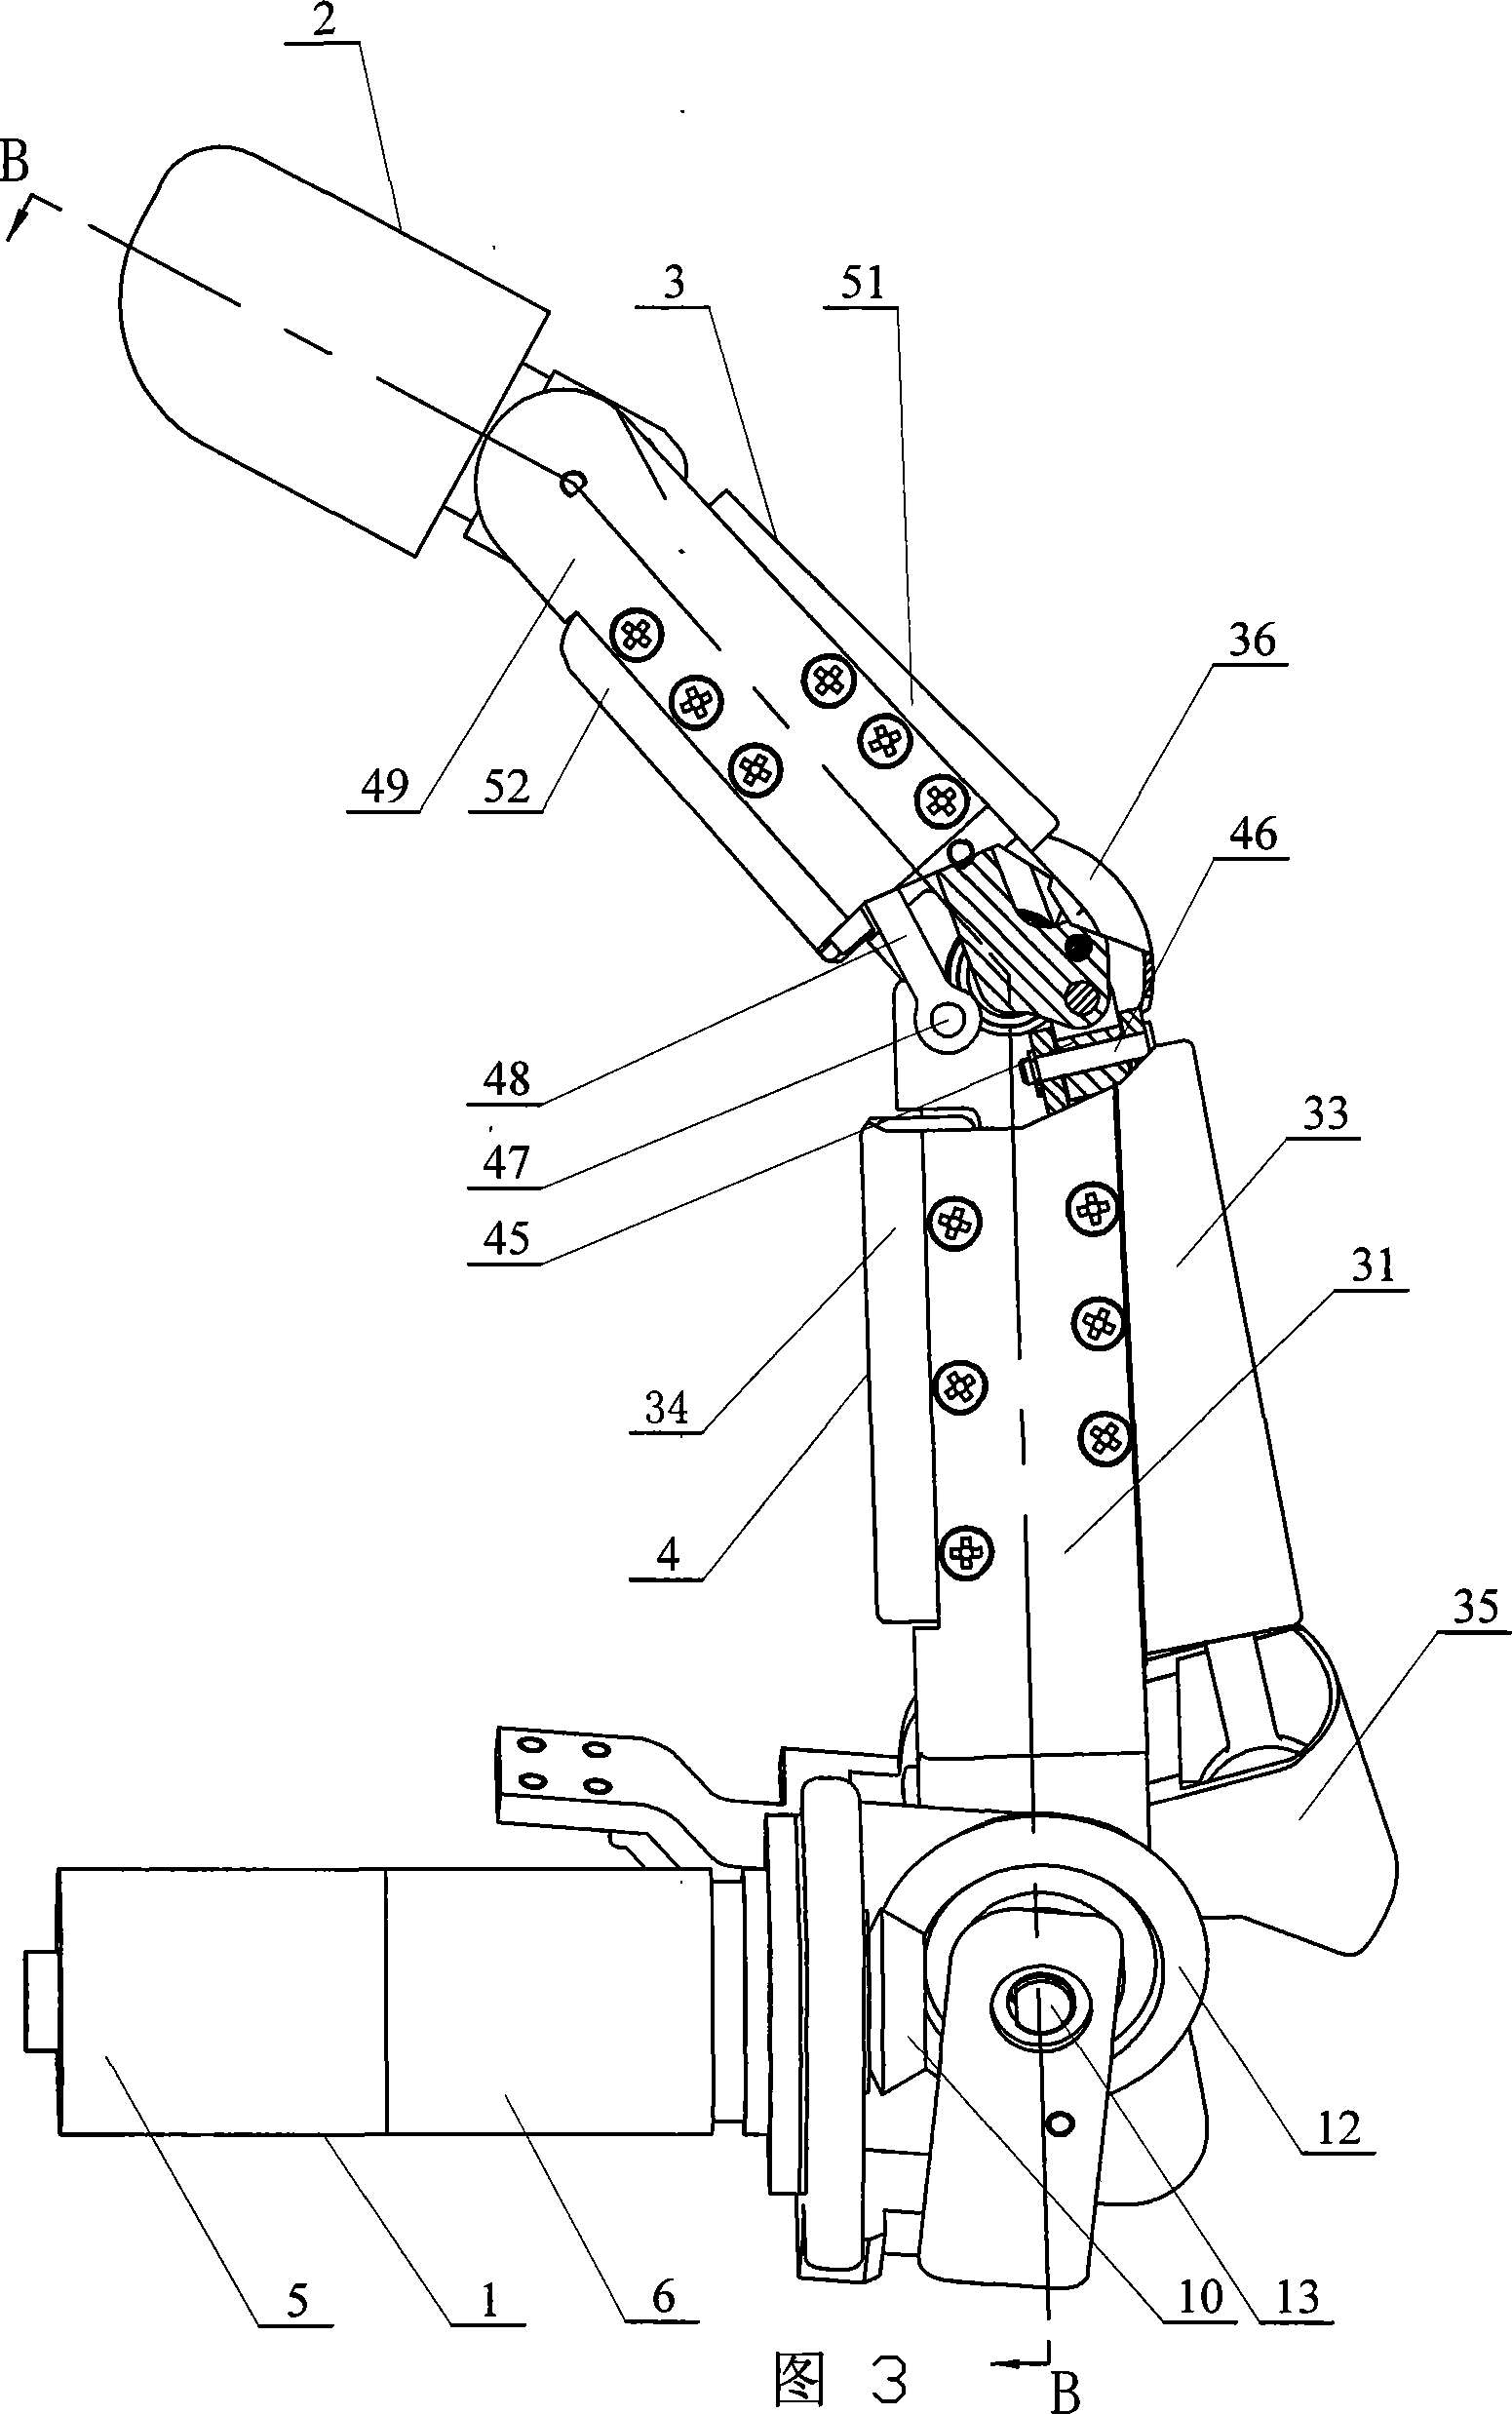 Thumb mechanism for under-driven adaptive prosthetic hand